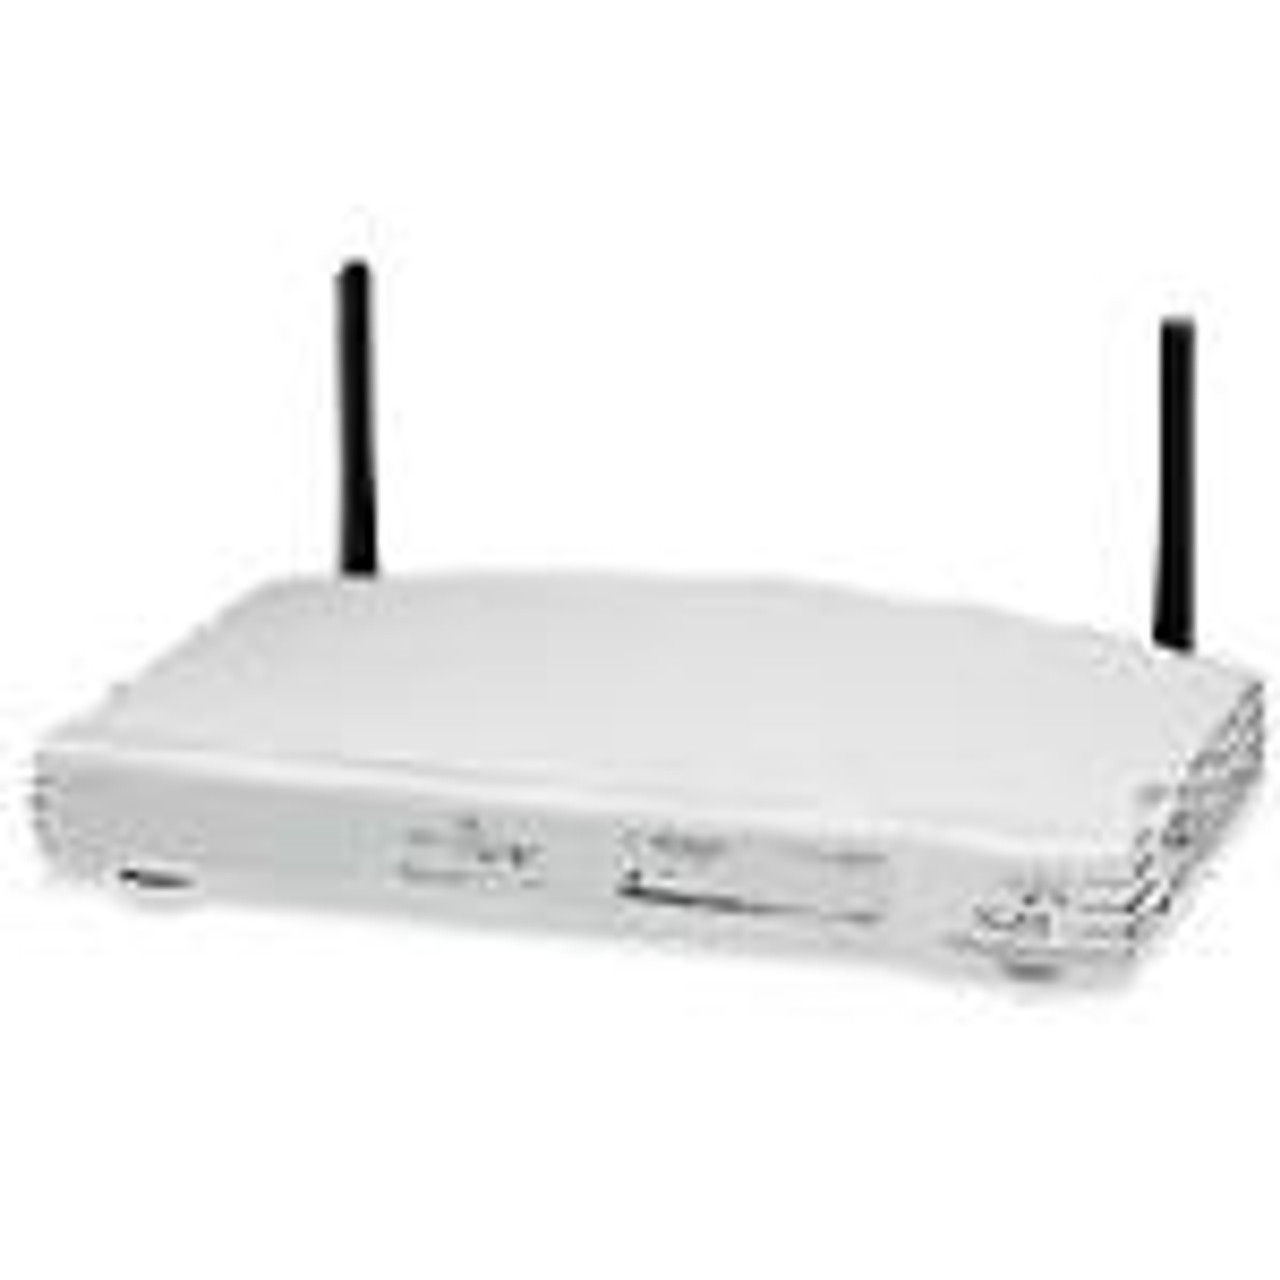 3CRWE754G72-A 3Com OfficeConnect ADSL Wireless 11g Firewall Router (Refurbished)